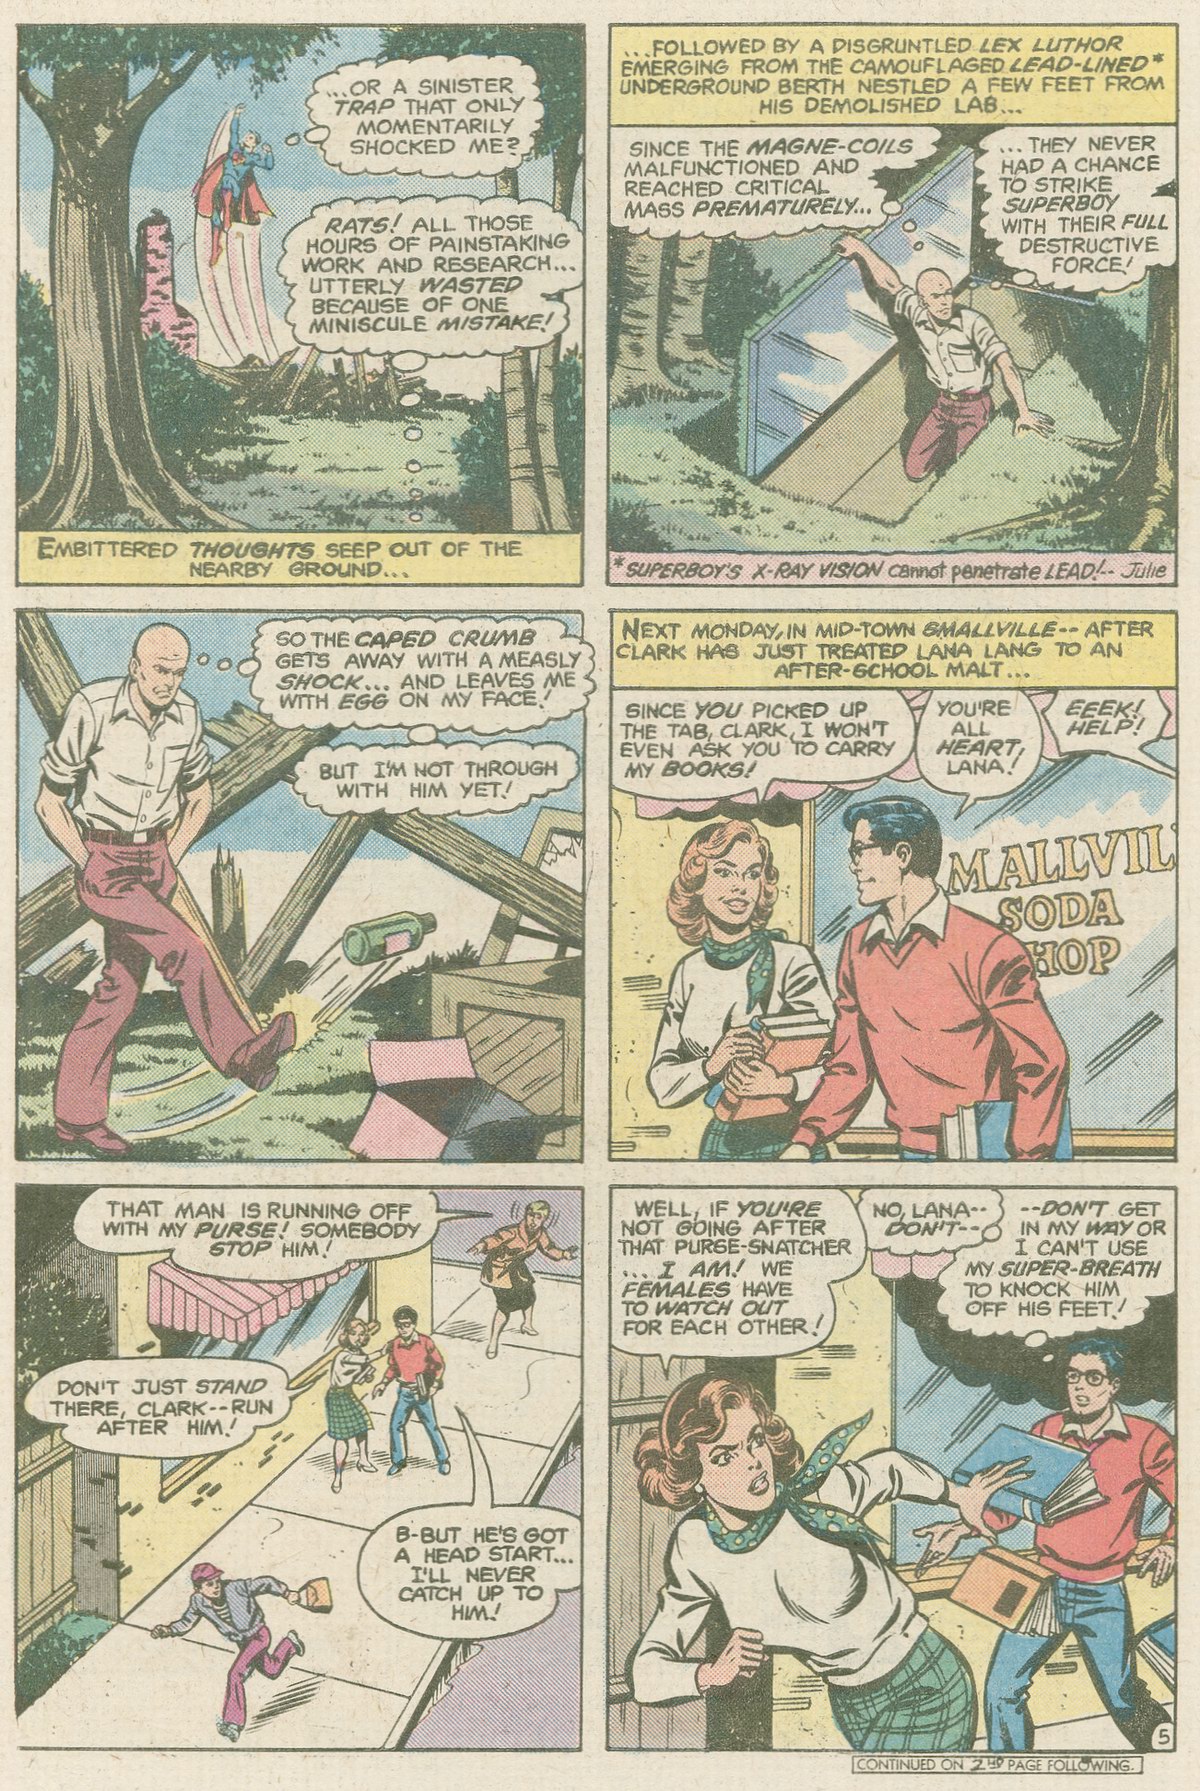 The New Adventures of Superboy 11 Page 5